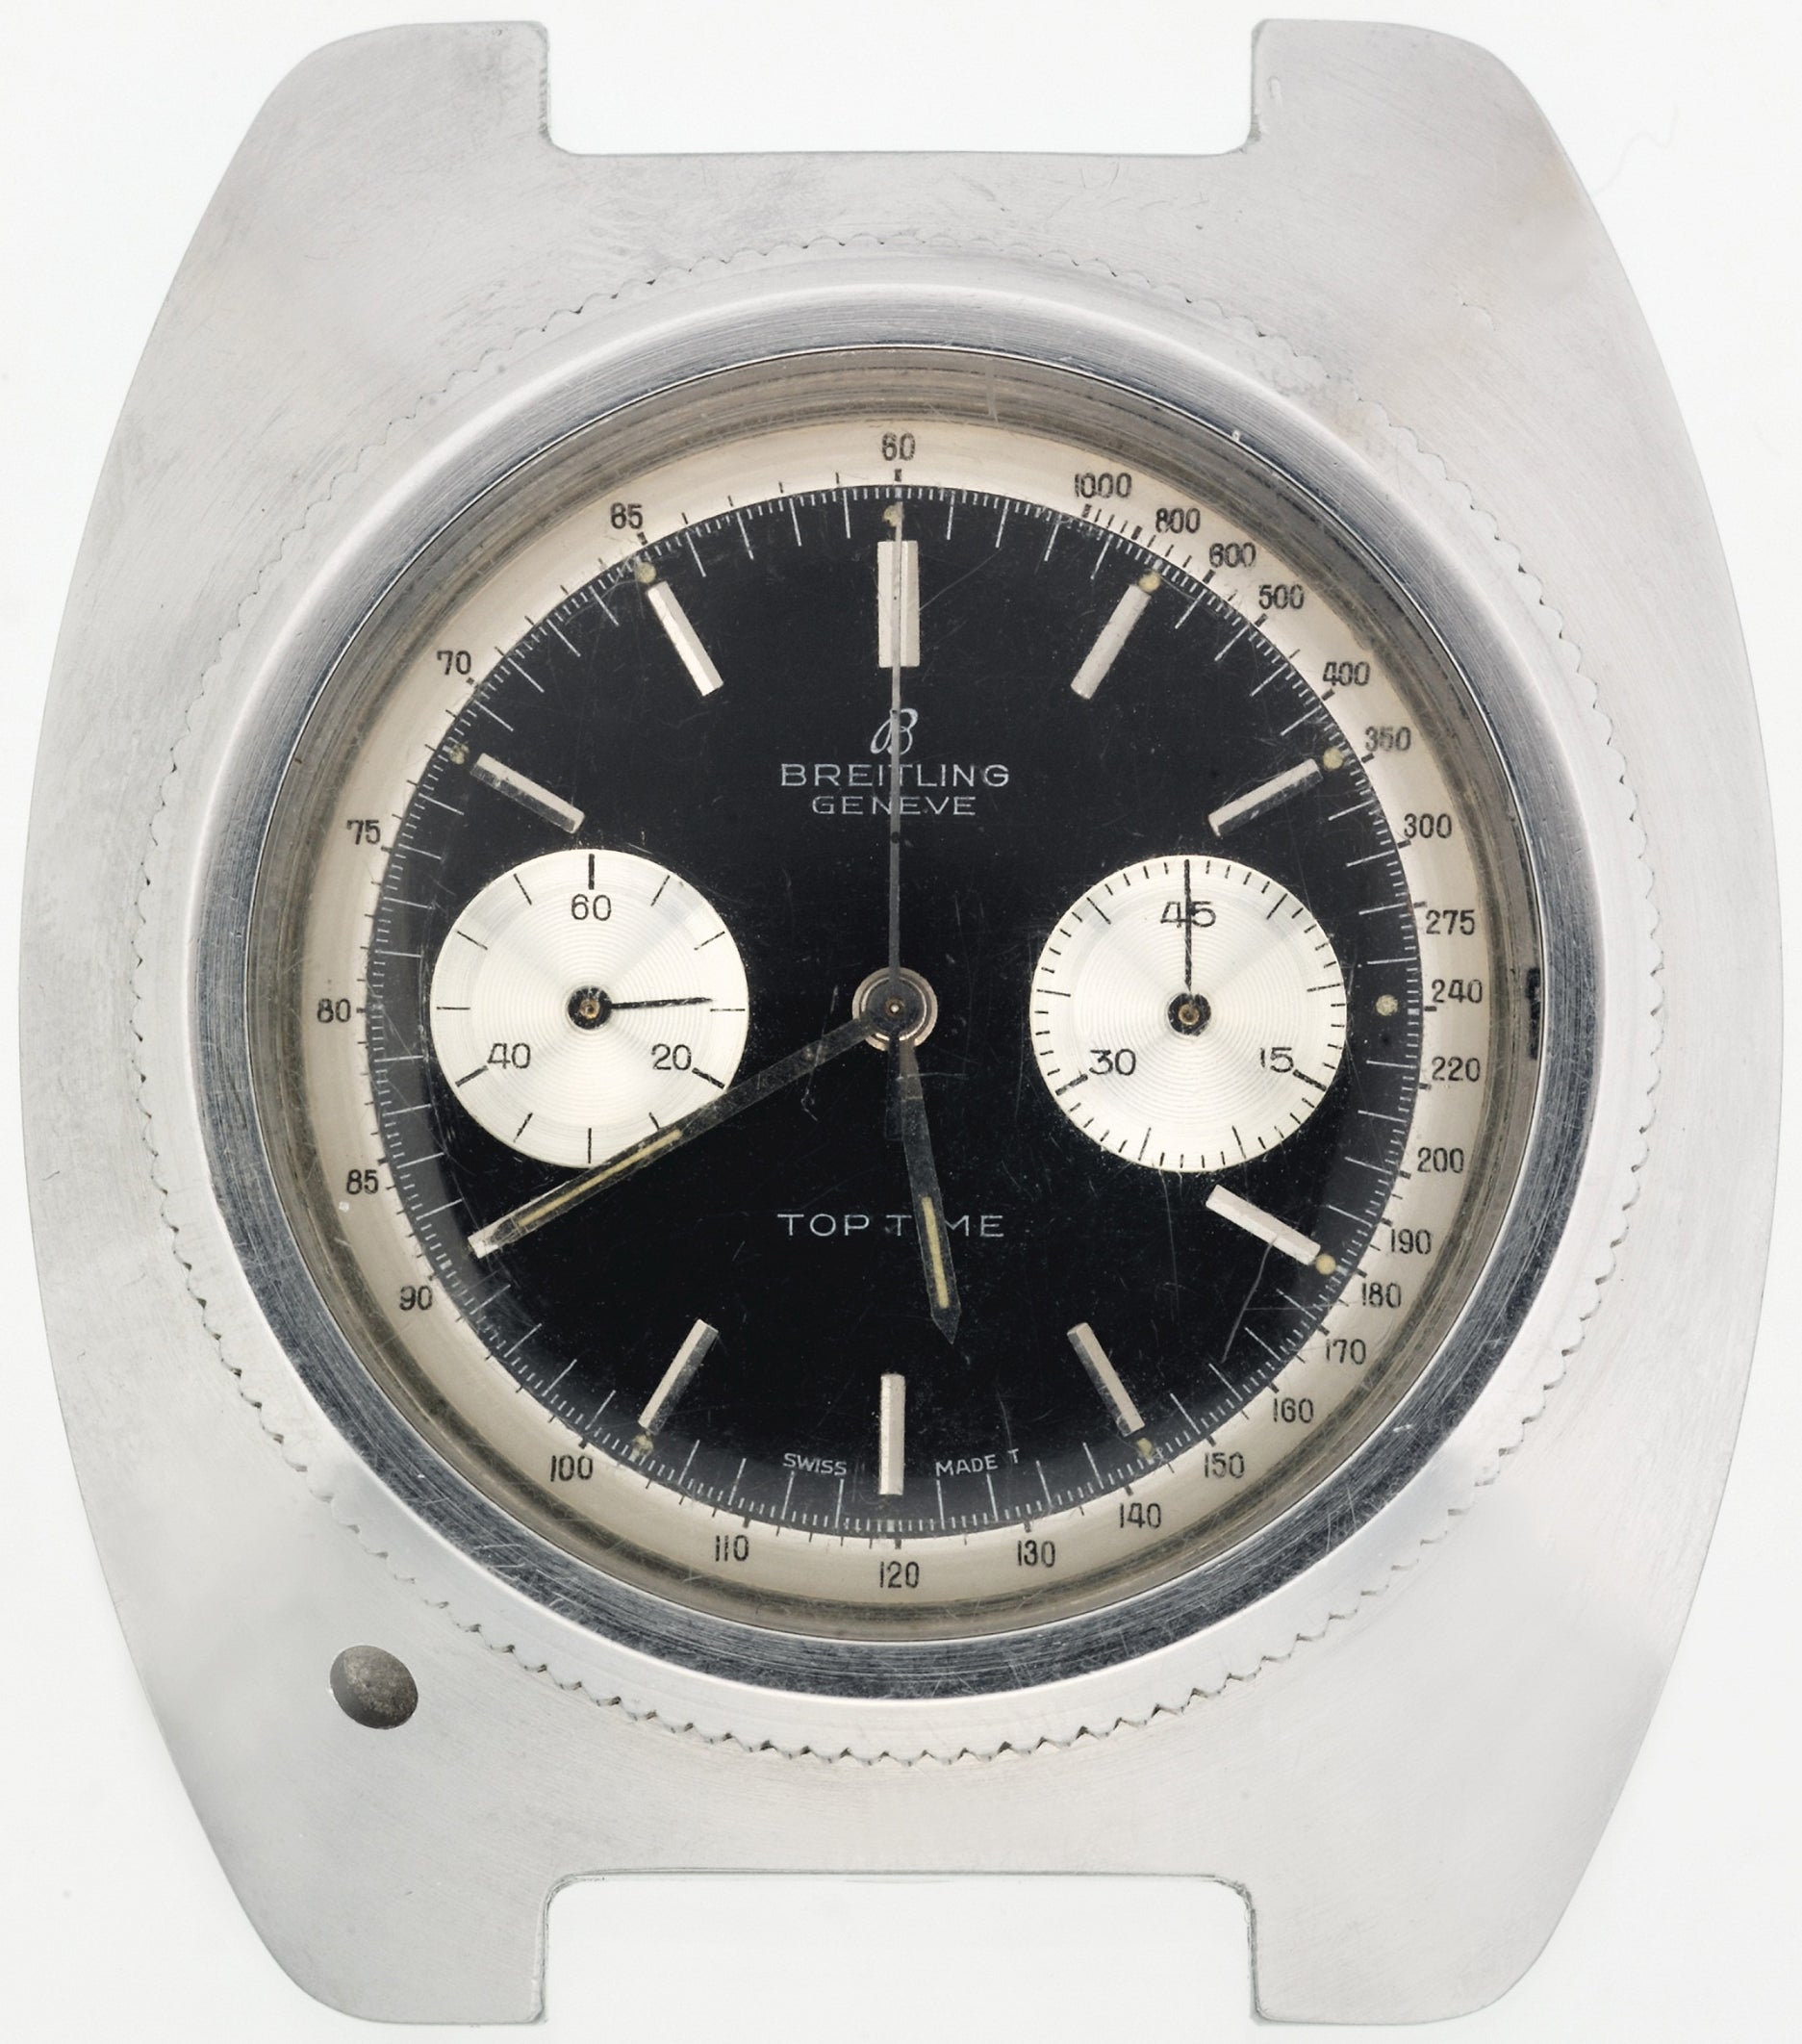 James Bond's specially modified Breitling Top Time wristwatch used in Thunderball, 1965, the watch composed of a stainless steel chronograph timepiece, by Breitling, Ref. 2002, case no. 984343, manufactured in 1962 and then modified, the black dial with a